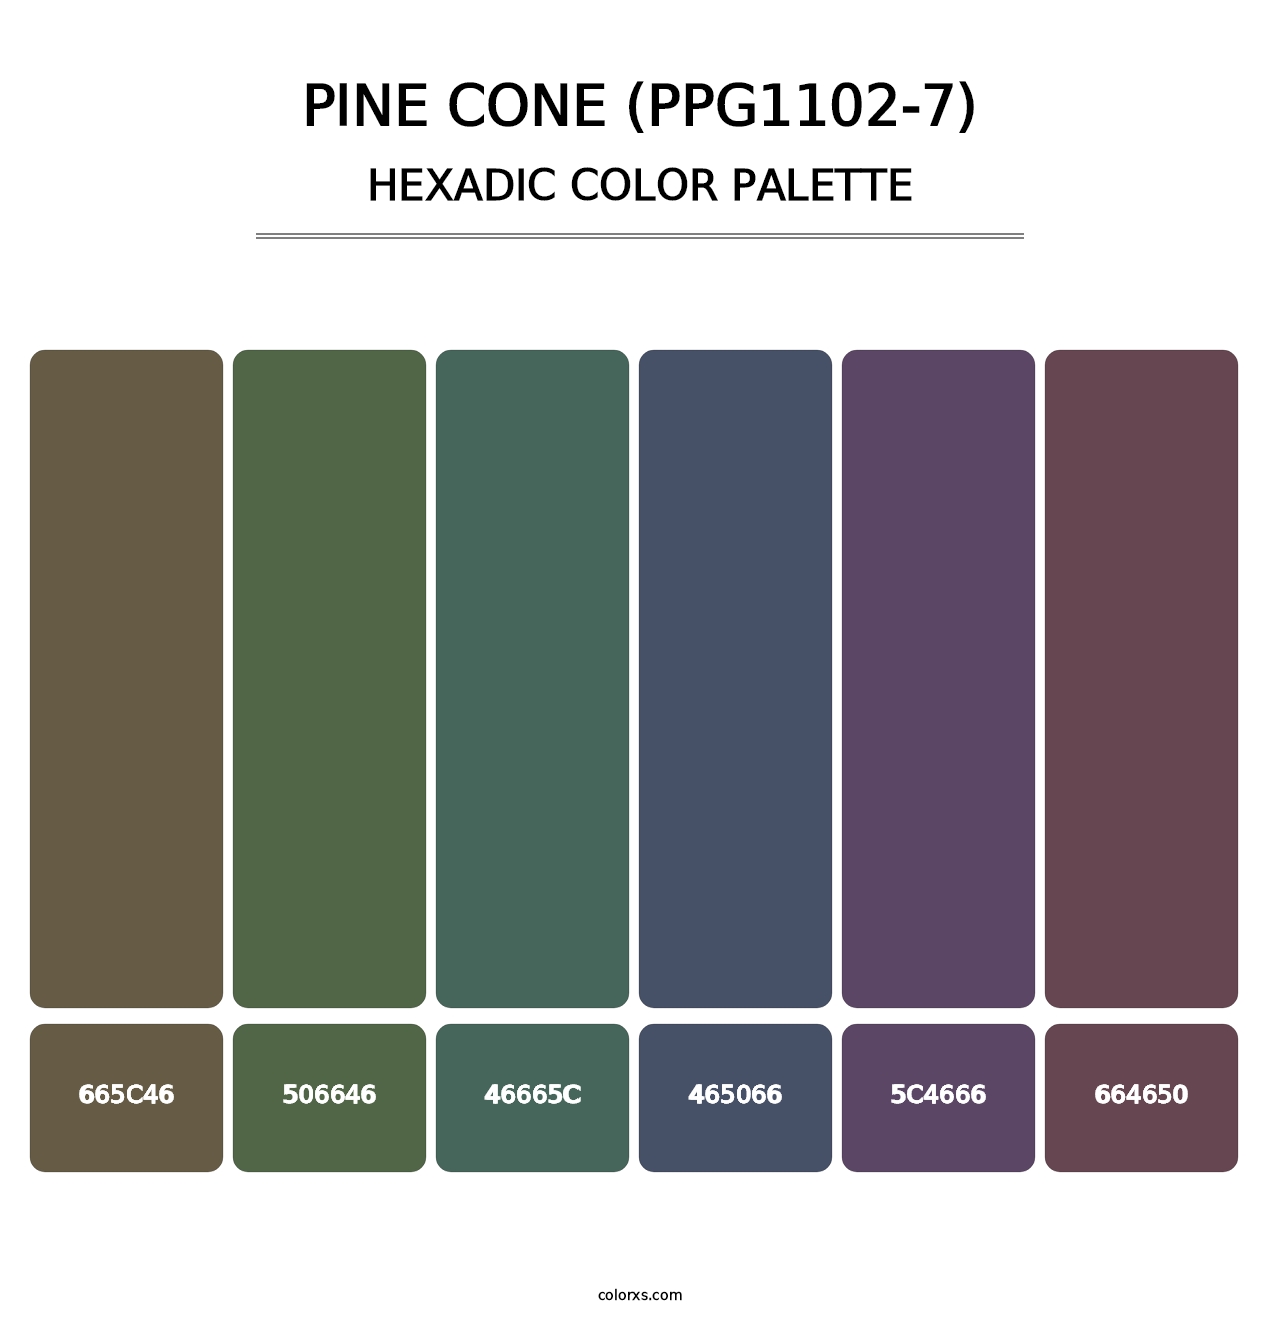 Pine Cone (PPG1102-7) - Hexadic Color Palette